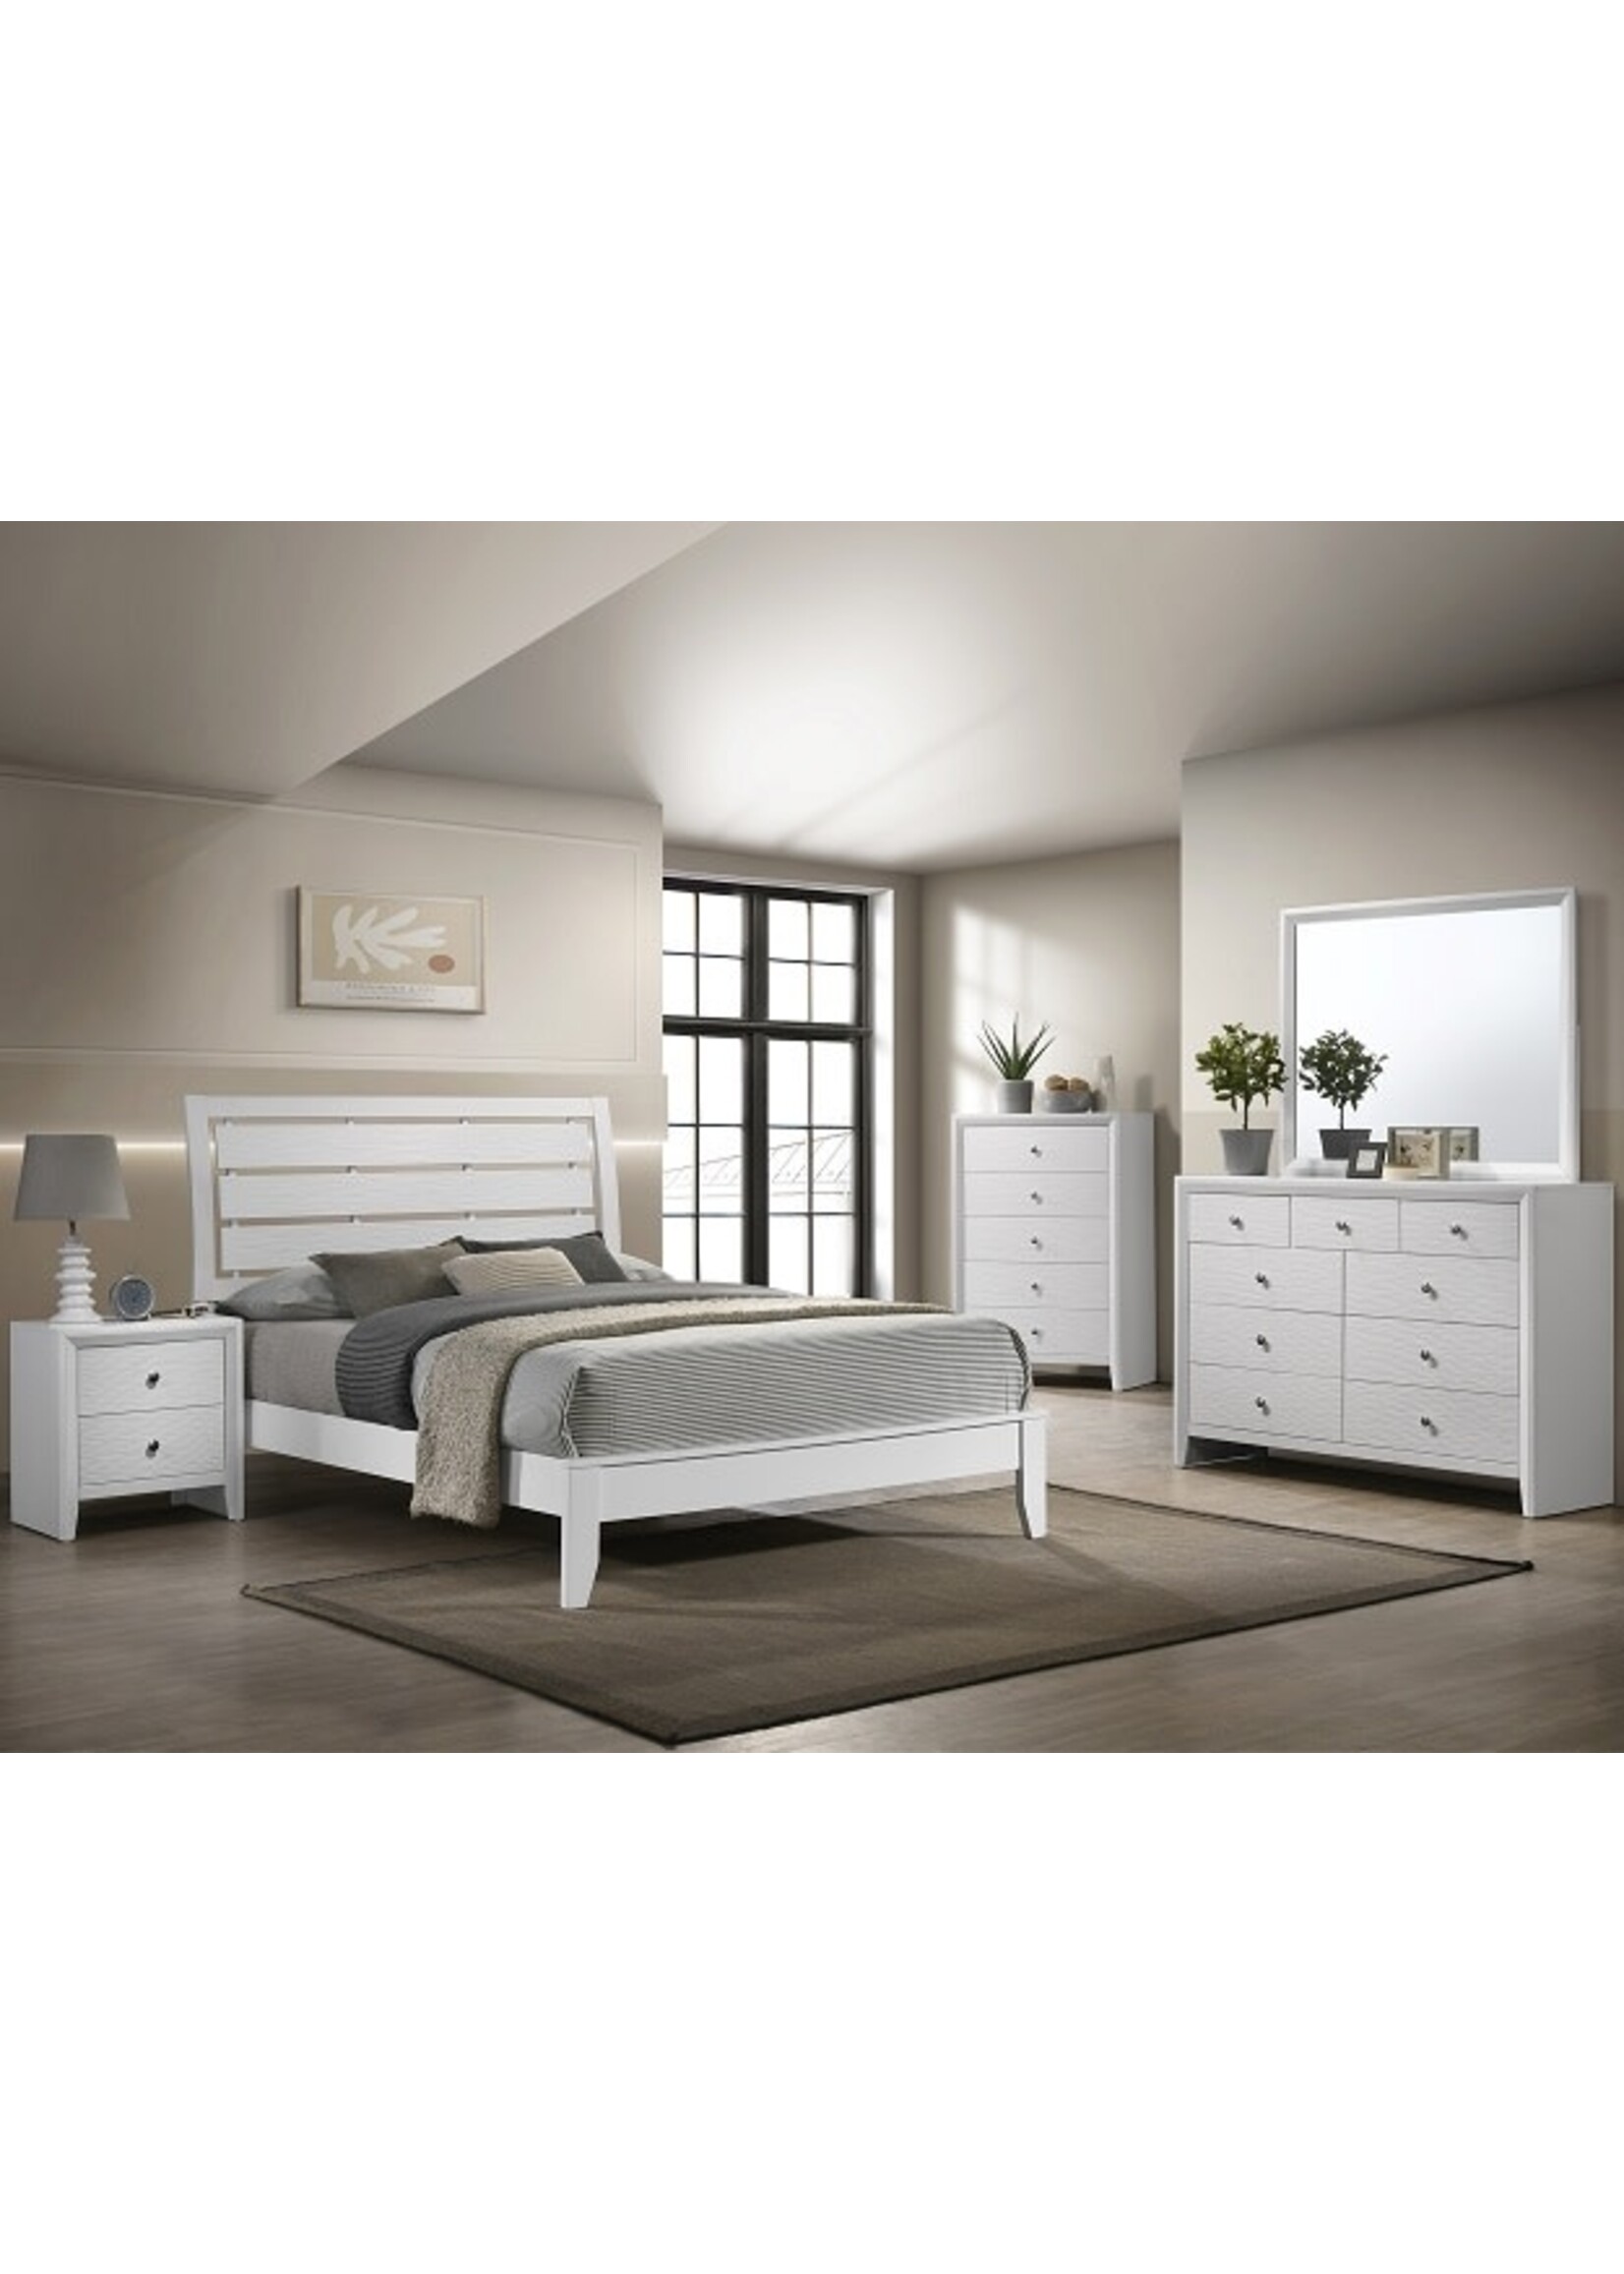 B4710 EVAN WHITE TWIN BED